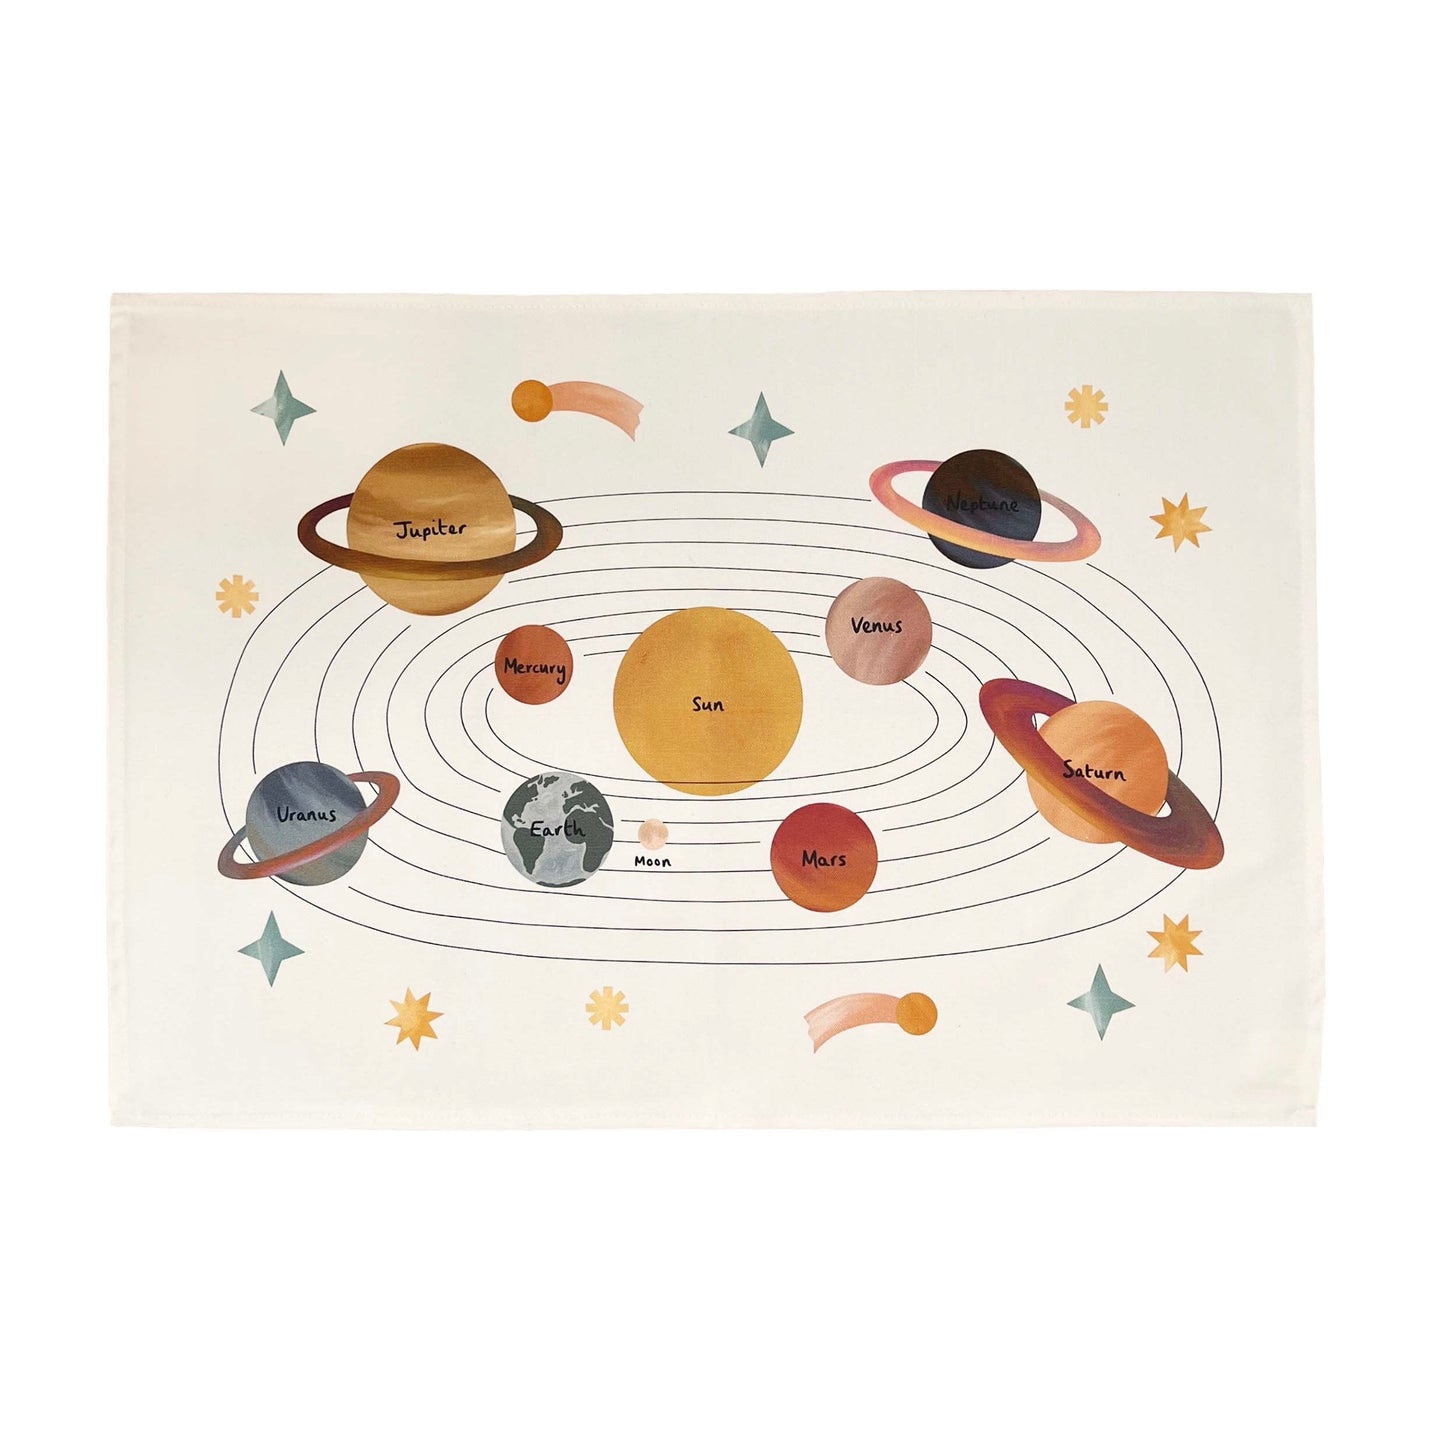 IMPERFECT SALE - Solar System Wall Hanging (Small)